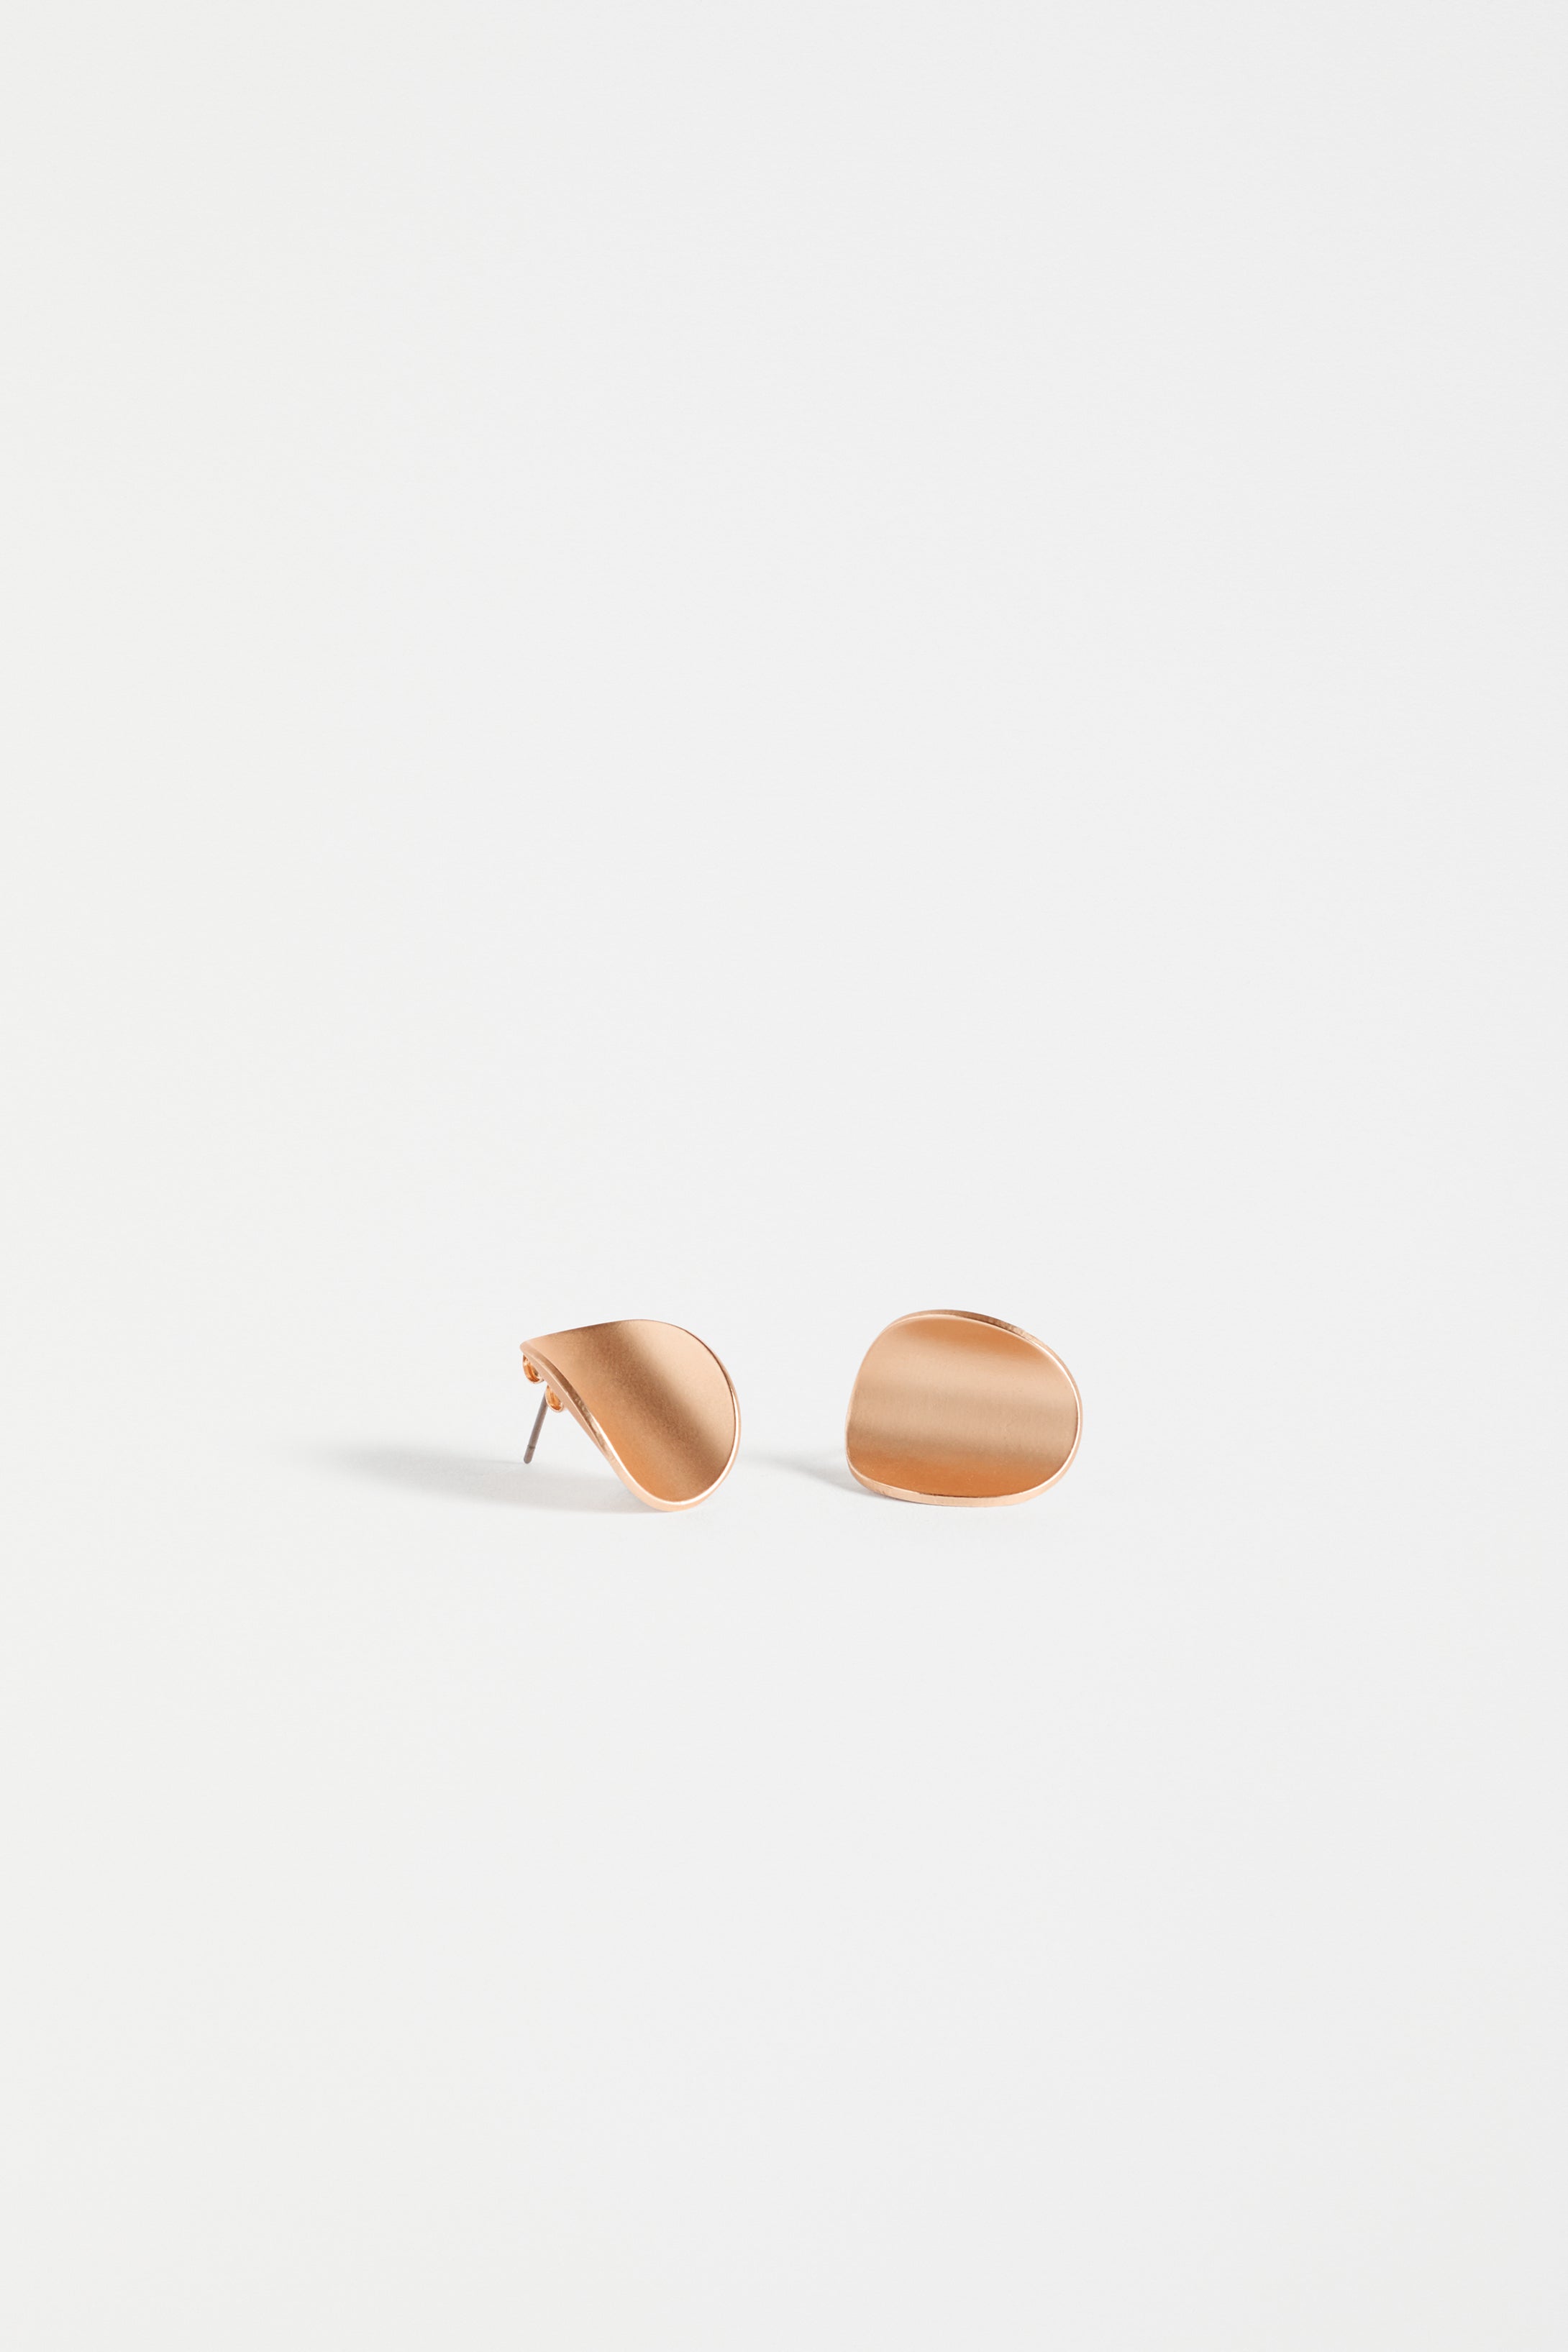 Kave Curve Disc Metallic Stud Earring | ROSE GOLD